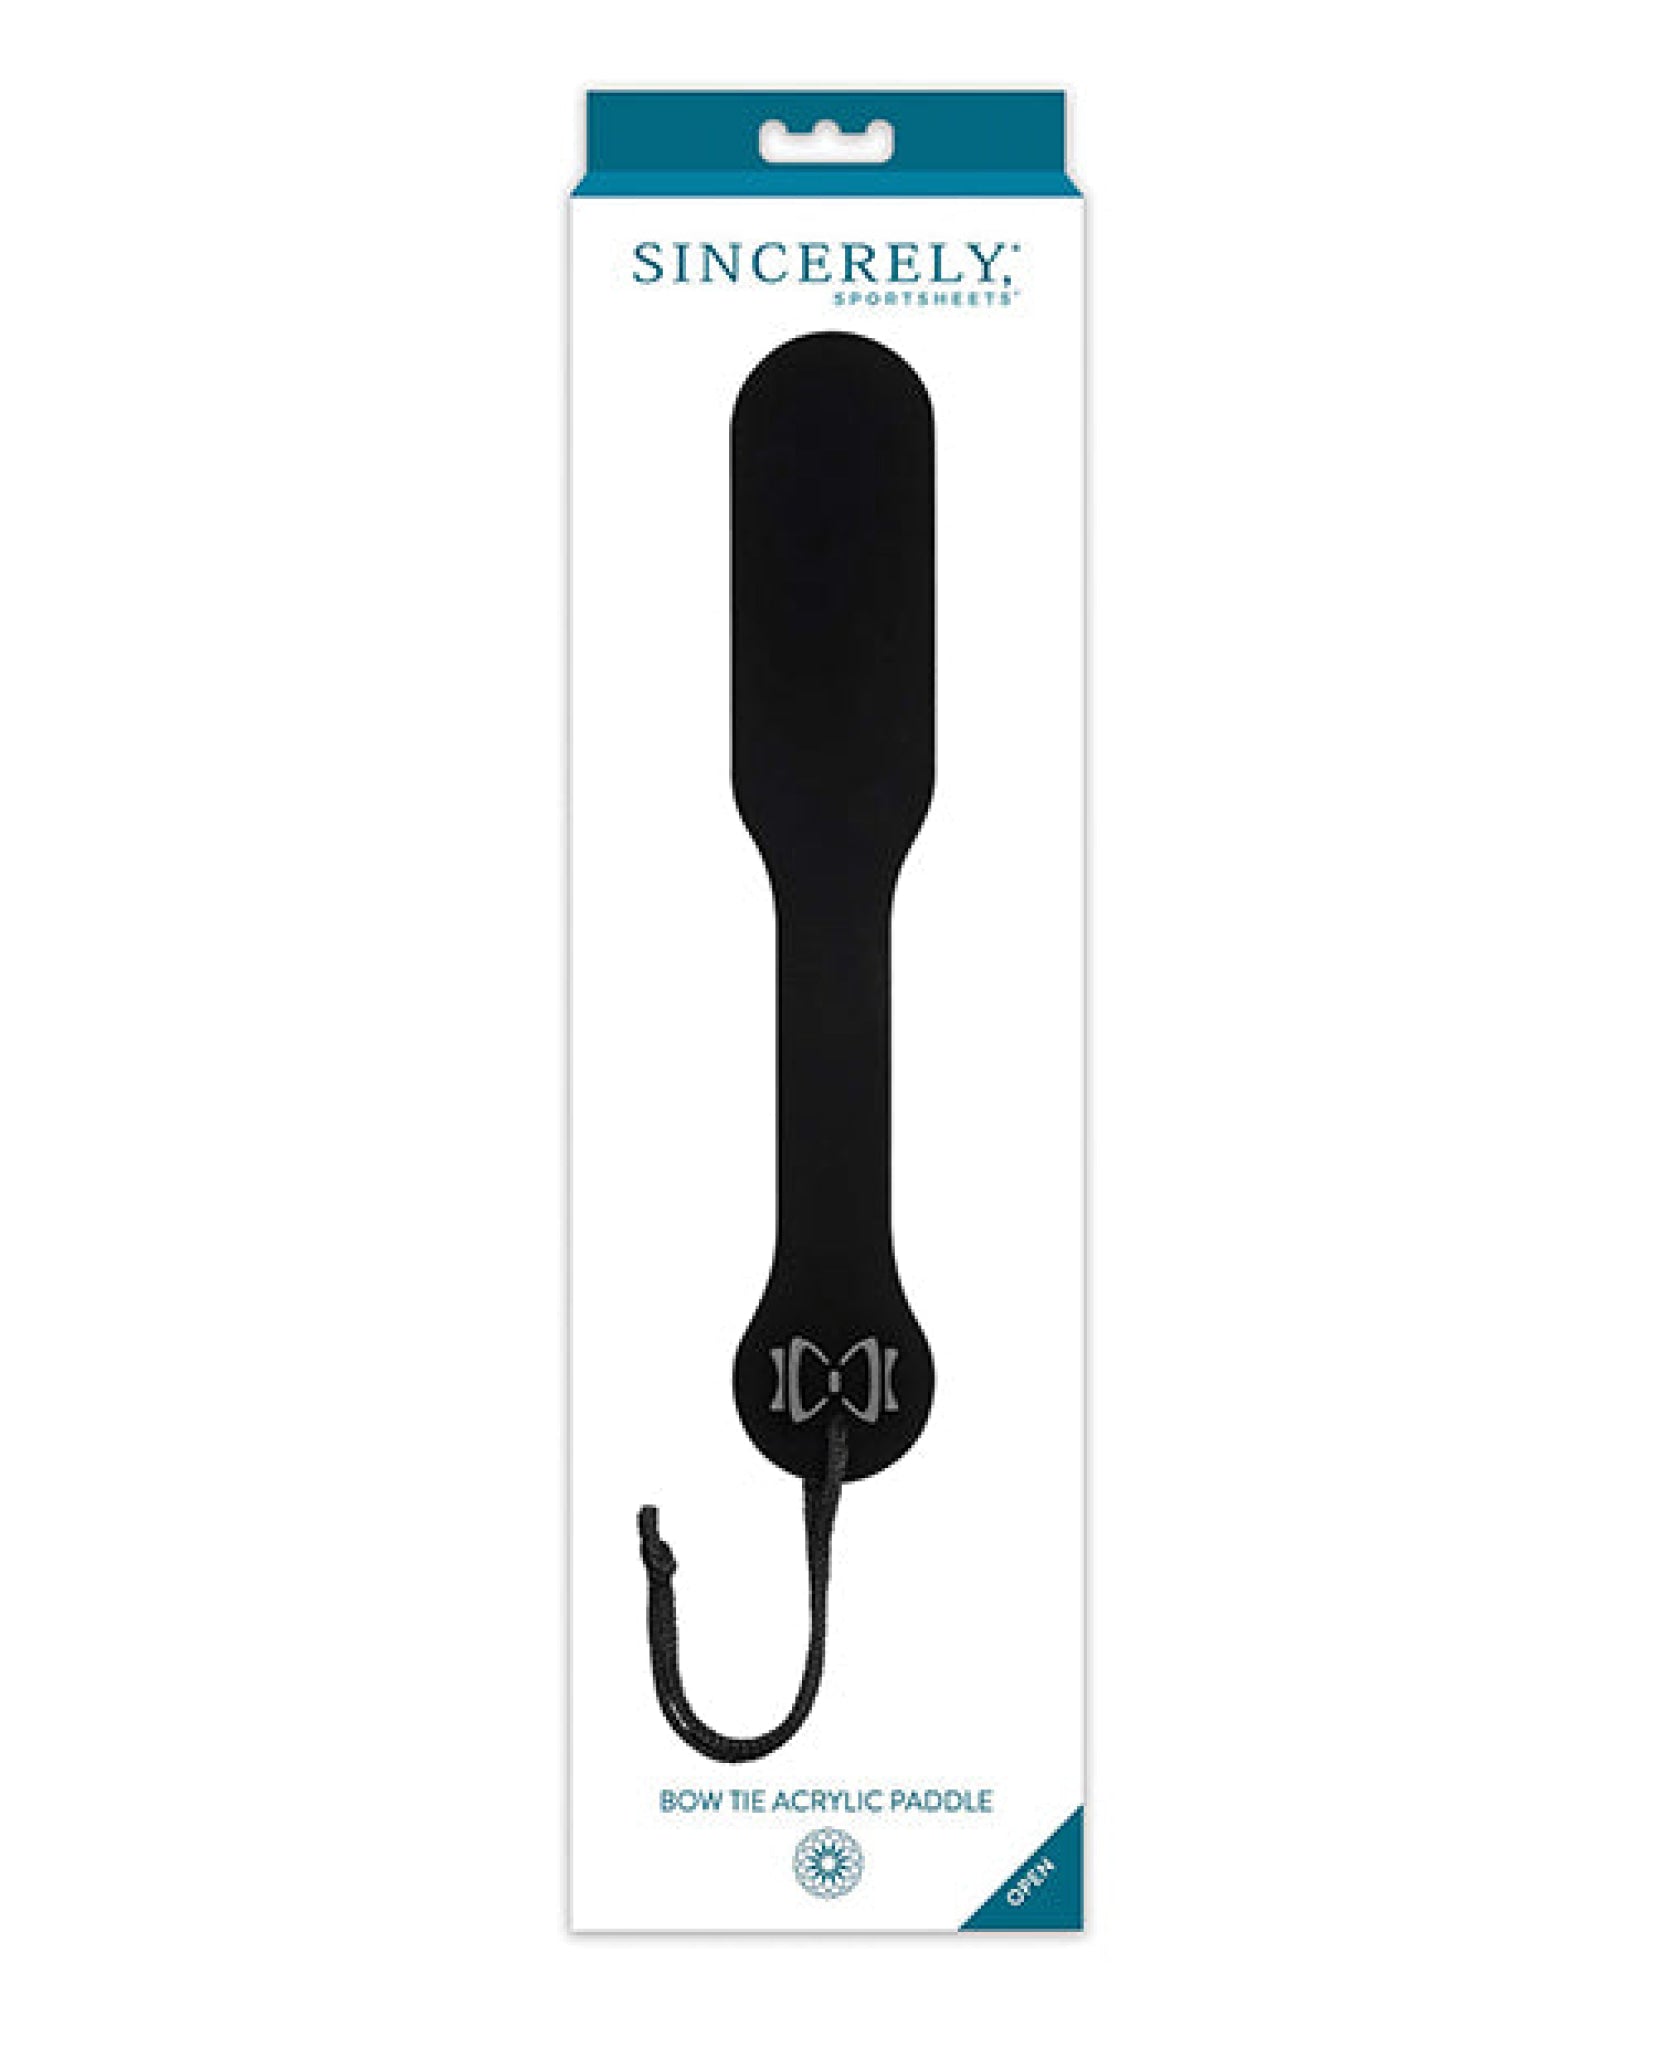 Sincerely Bow Tie Acrylic Paddle Sincerely